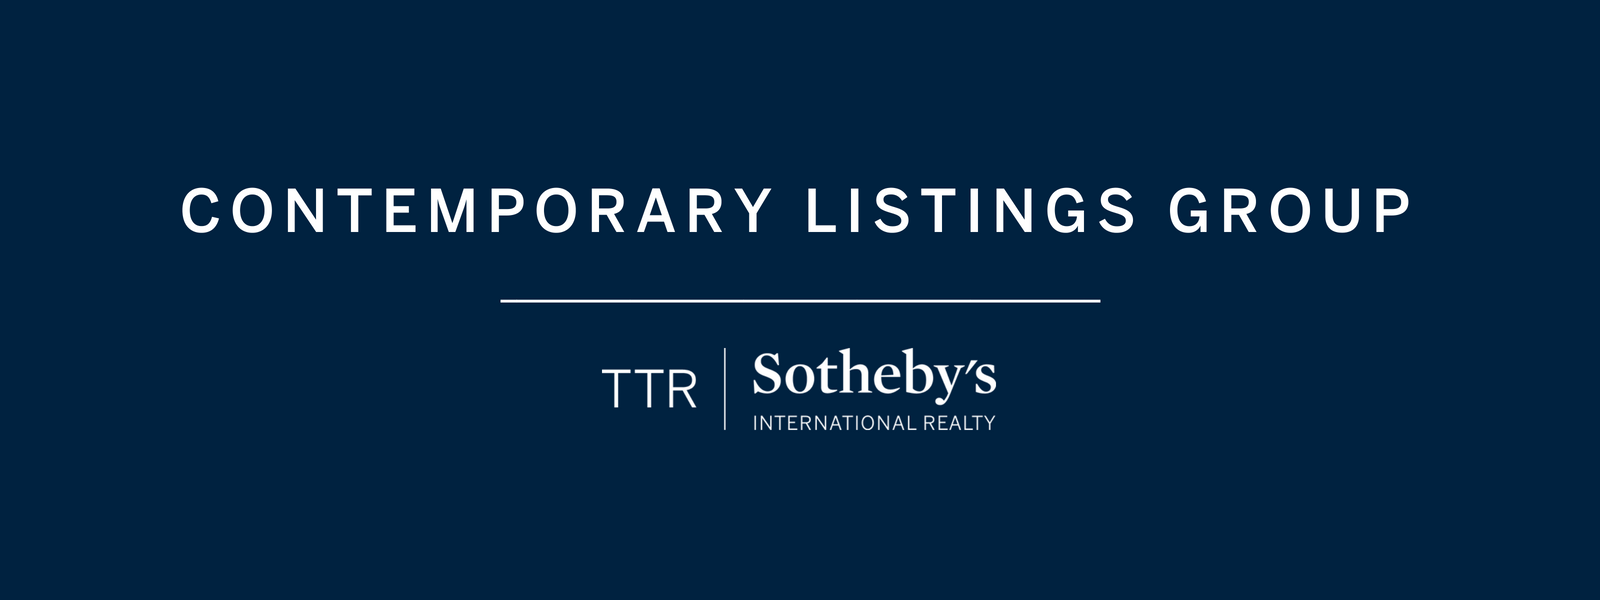 Contemporary Listings Group